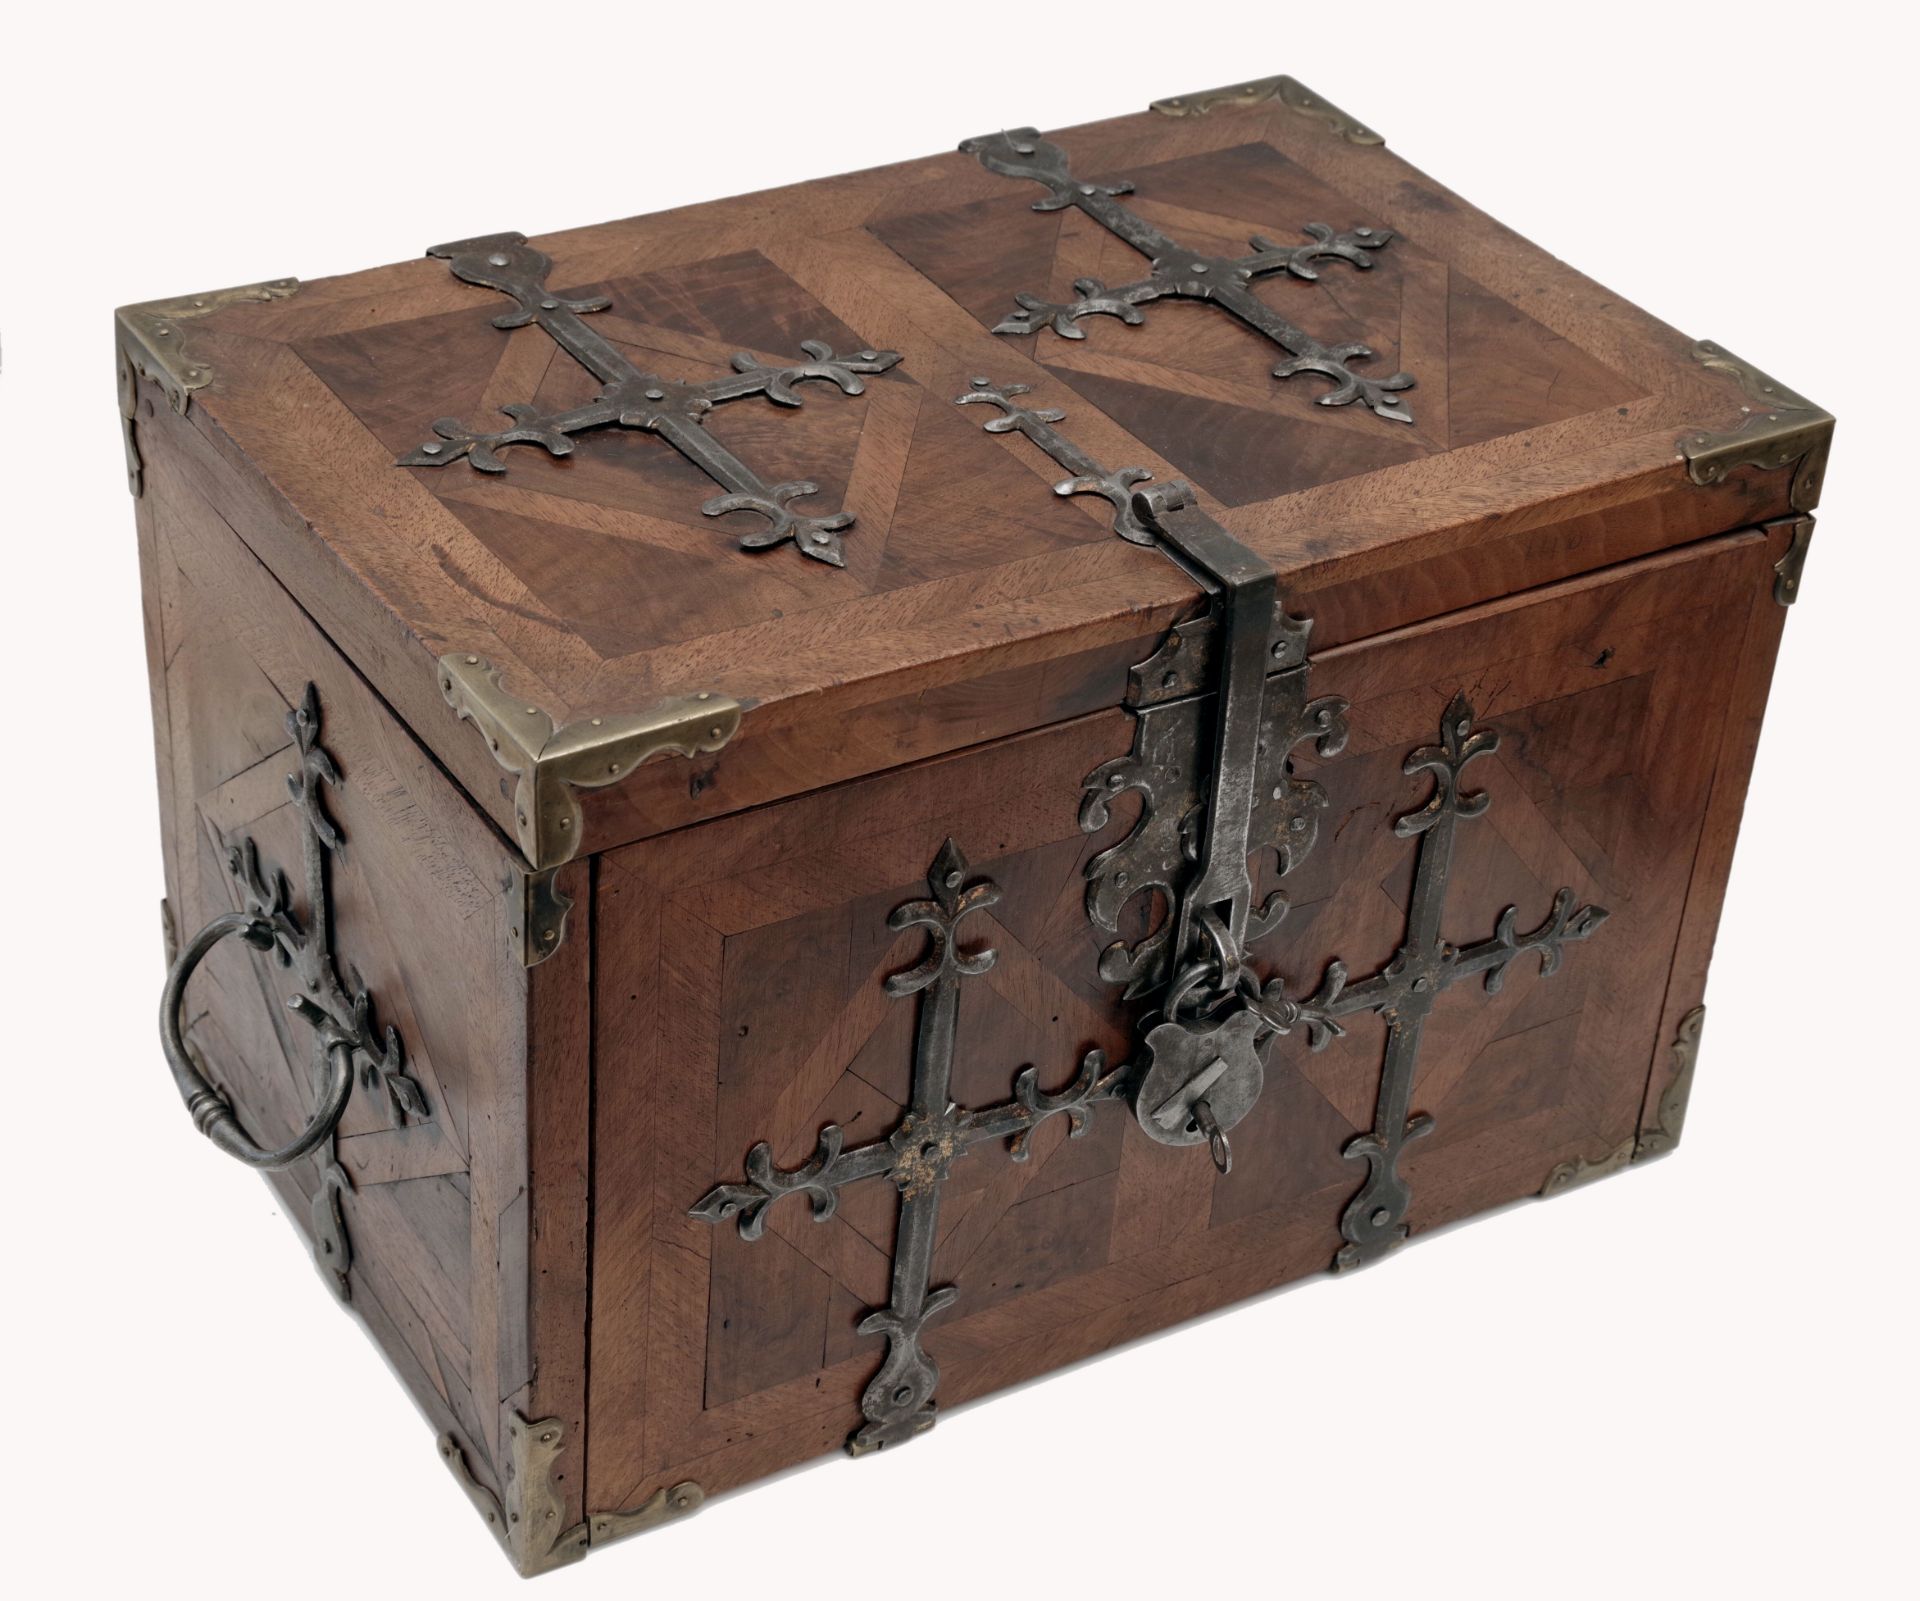 Box with inlays and secret drawers